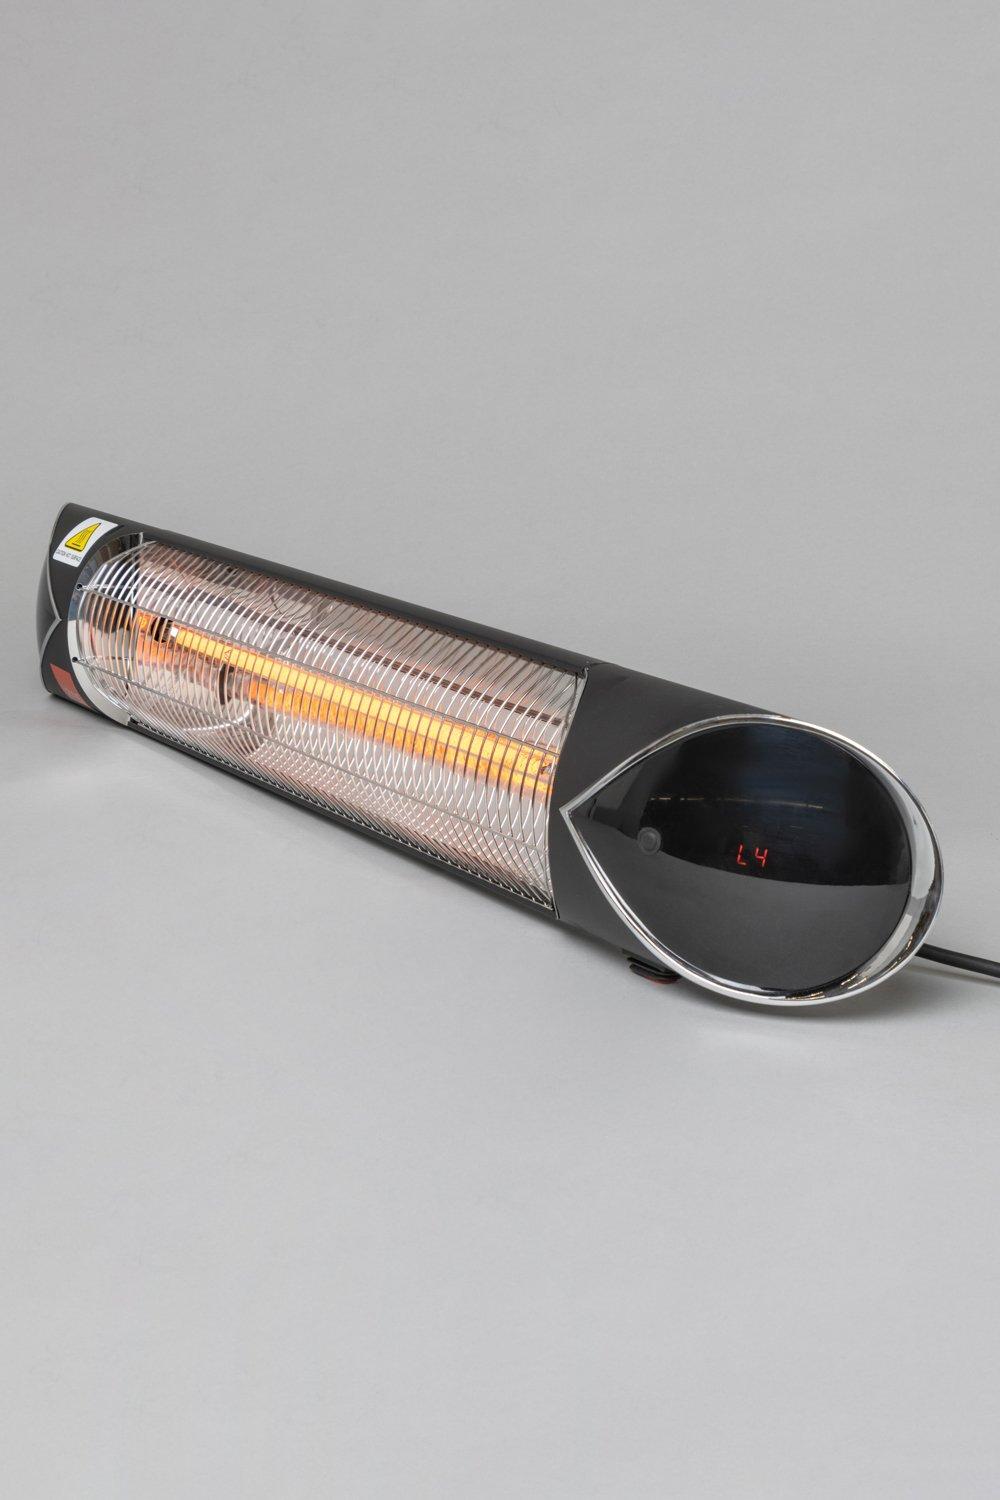 2000W Large Wall Rounded Radiant Heater